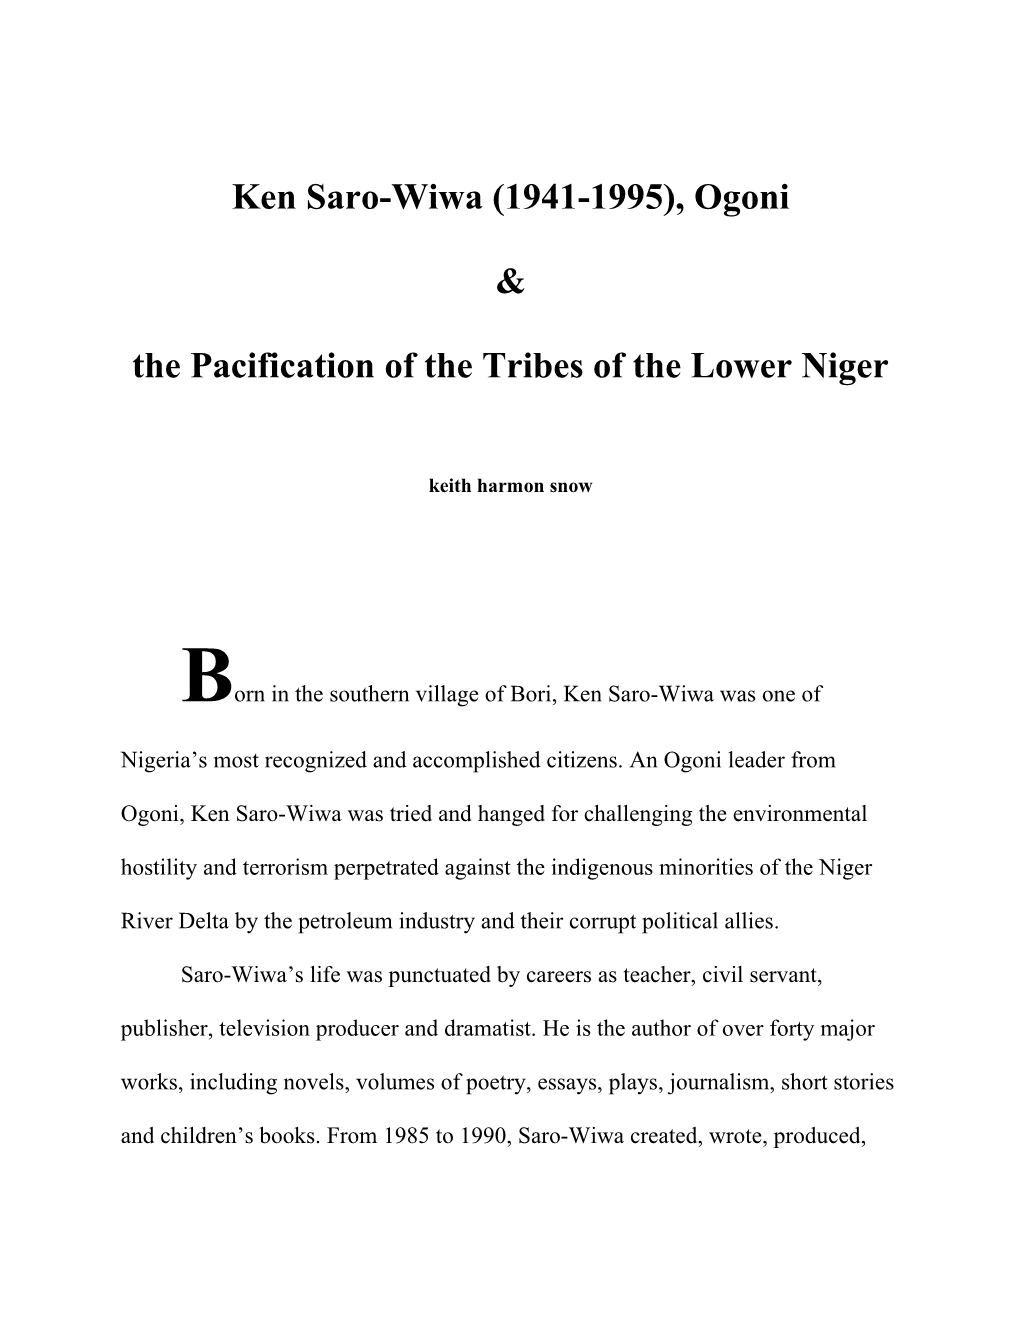 The Pacification of the Tribes of the Lower Niger